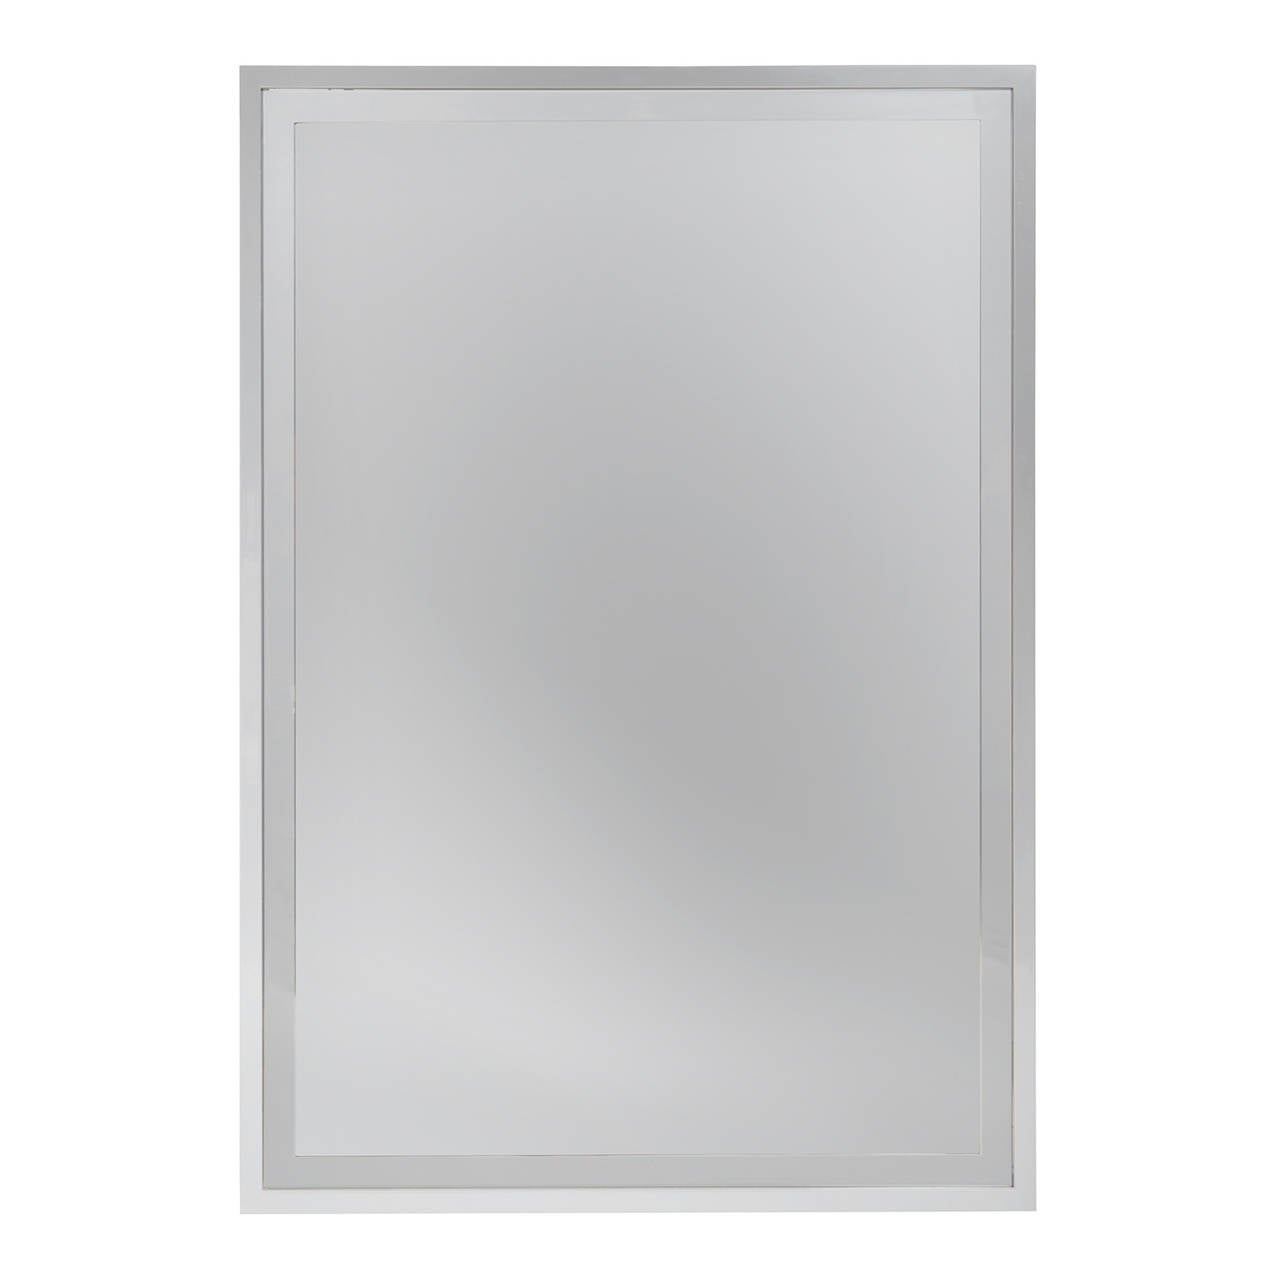 A substantial and superbly rendered rectangular chromed wall mirror having a distinctive frame within a frame detail.